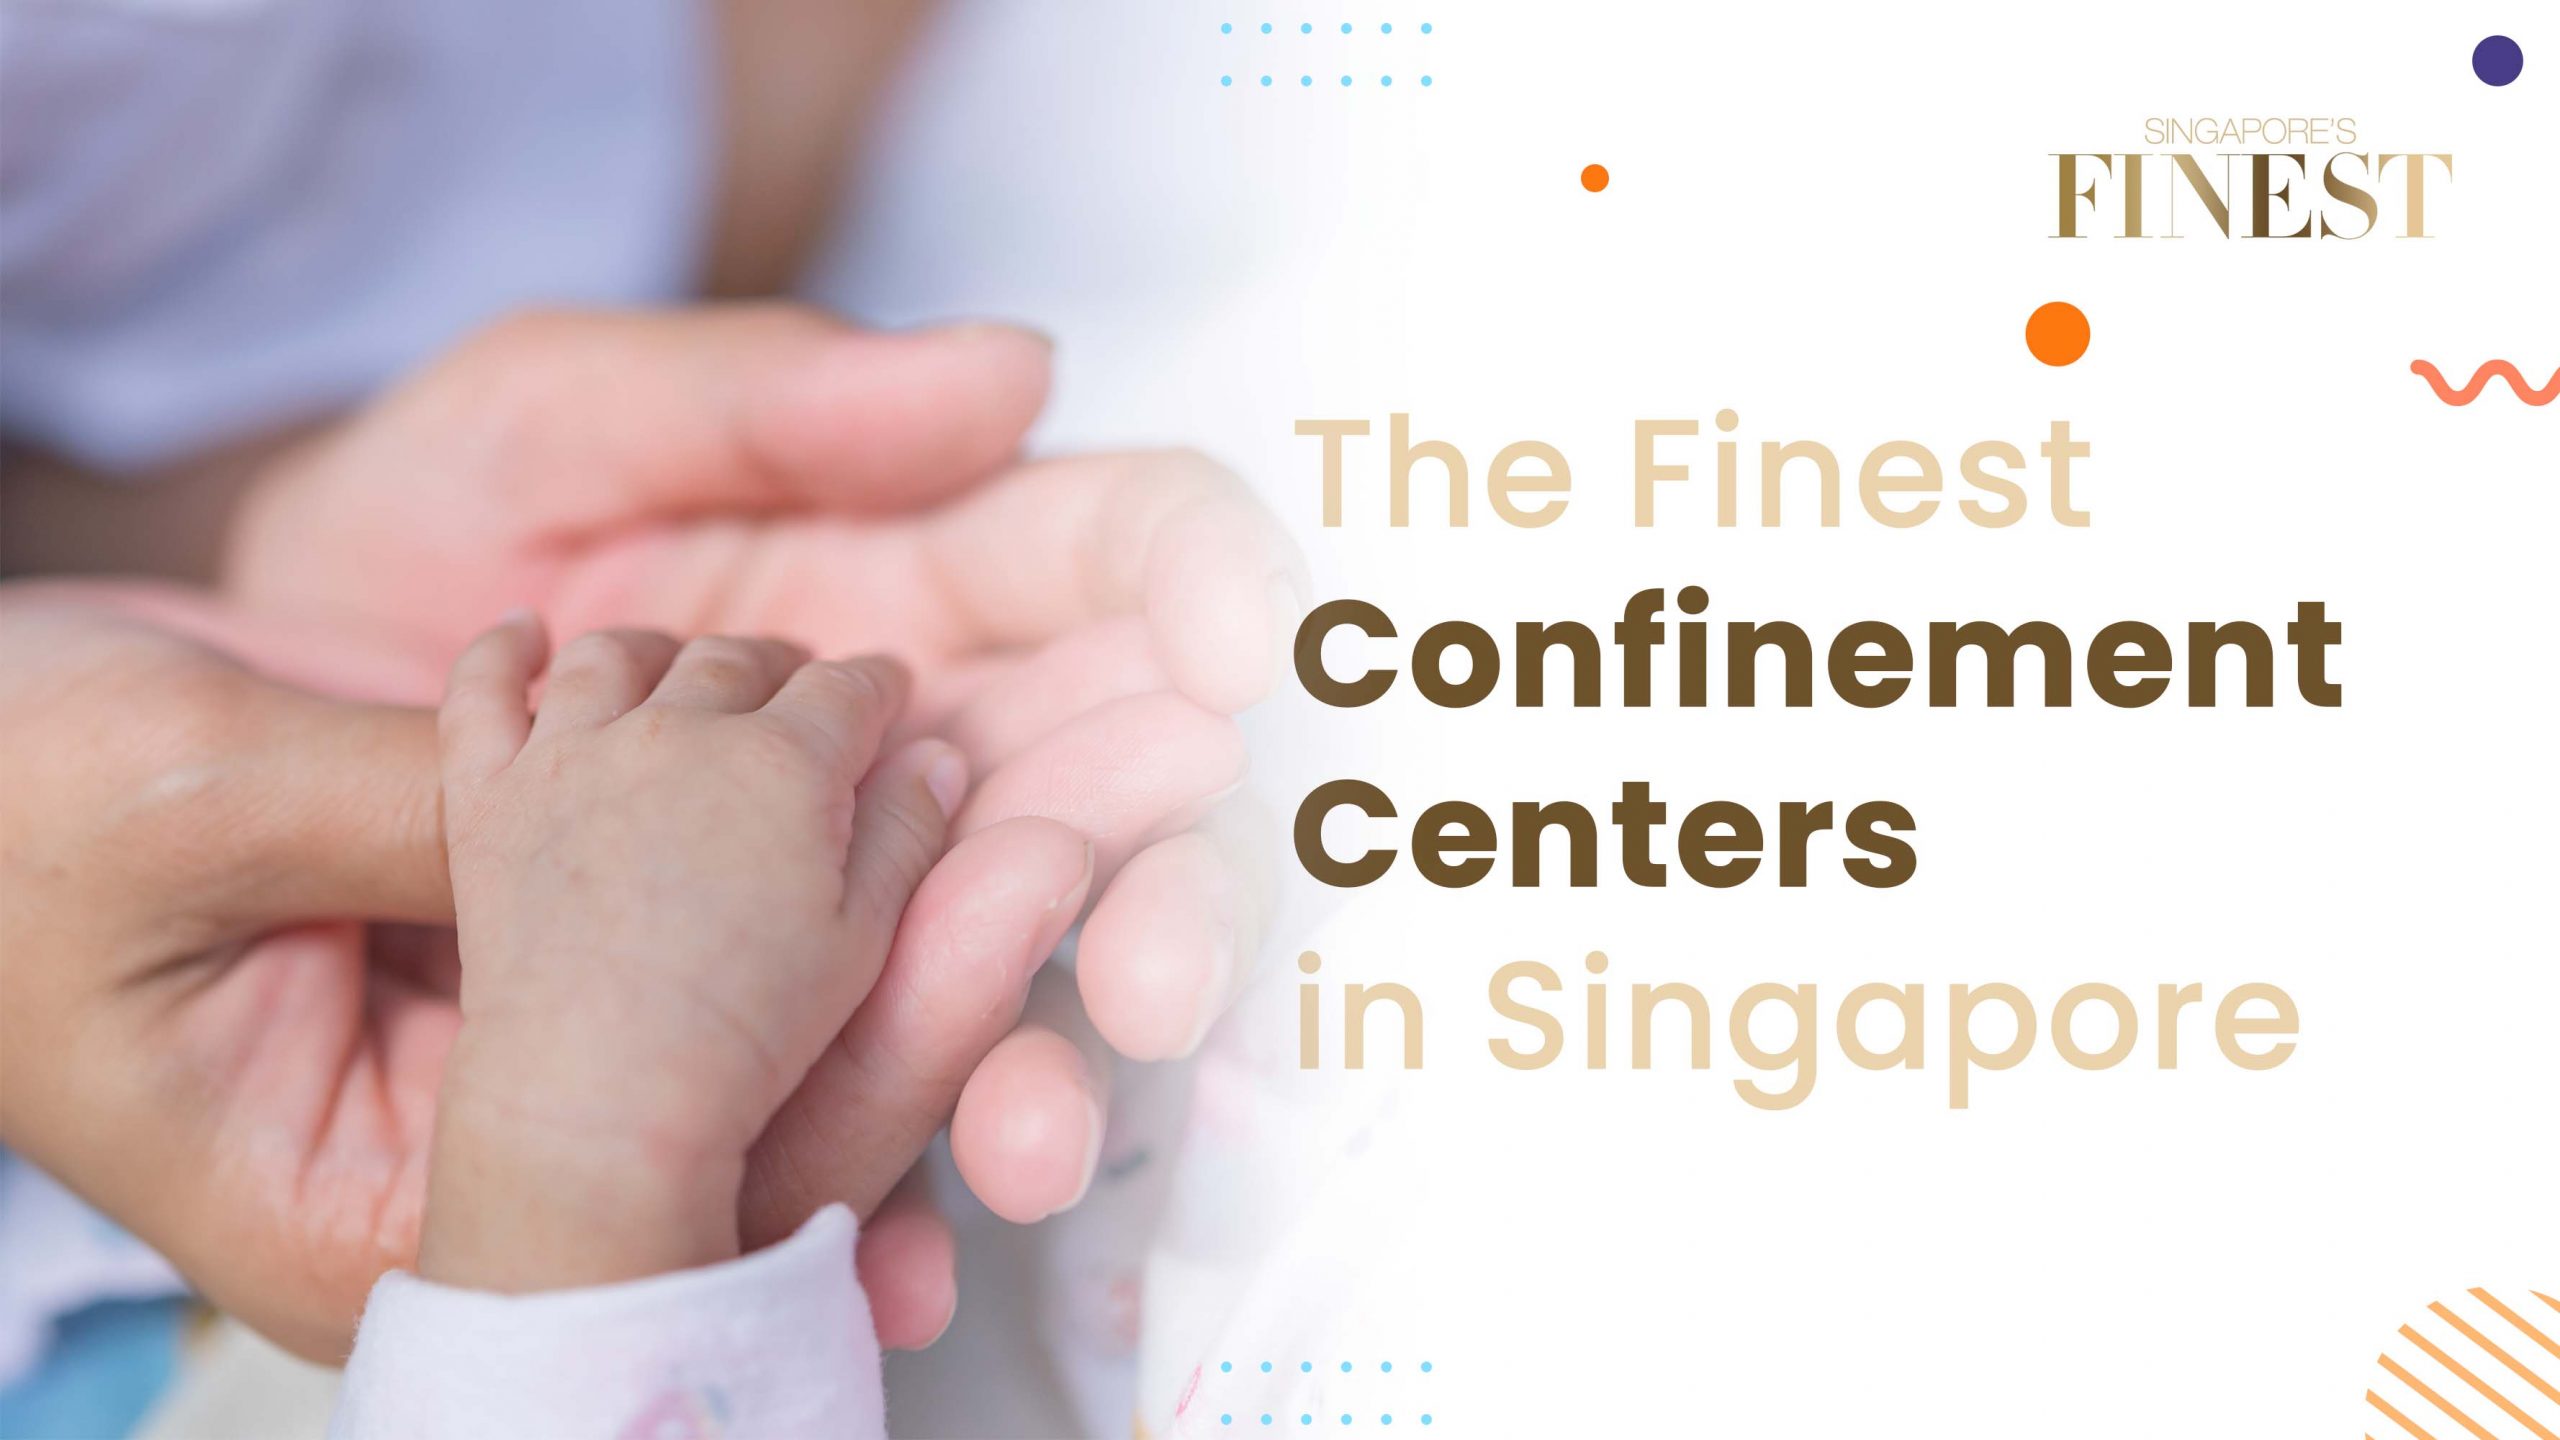 The Finest Confinement Centers in Singapore